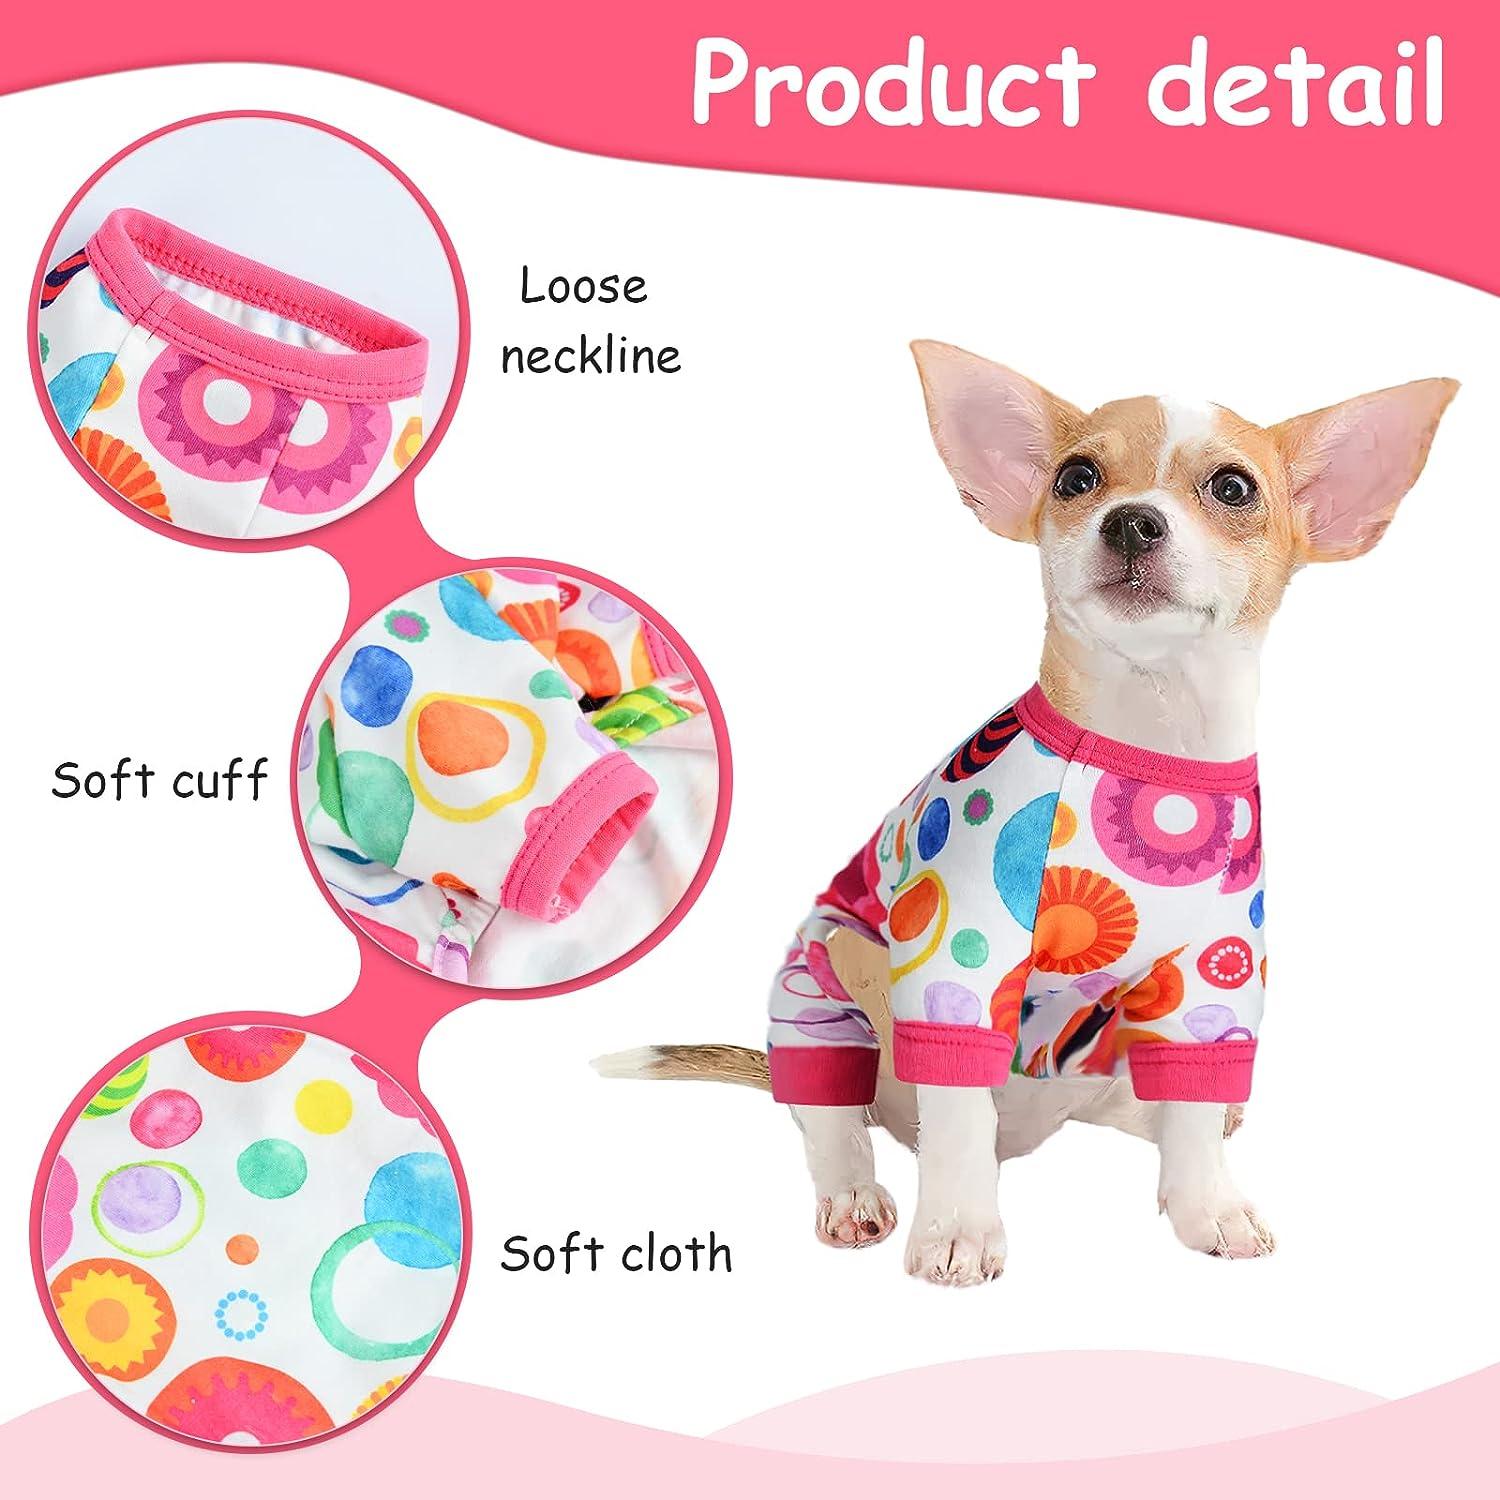 Dog Clothes for Small Dog Girl Pink Floral Dog Pajamas Onesies for Extra  Small Dog - Teacup Dog Chihuahua Yorkie Clothes, Cute Small Dog Costume  Puppy